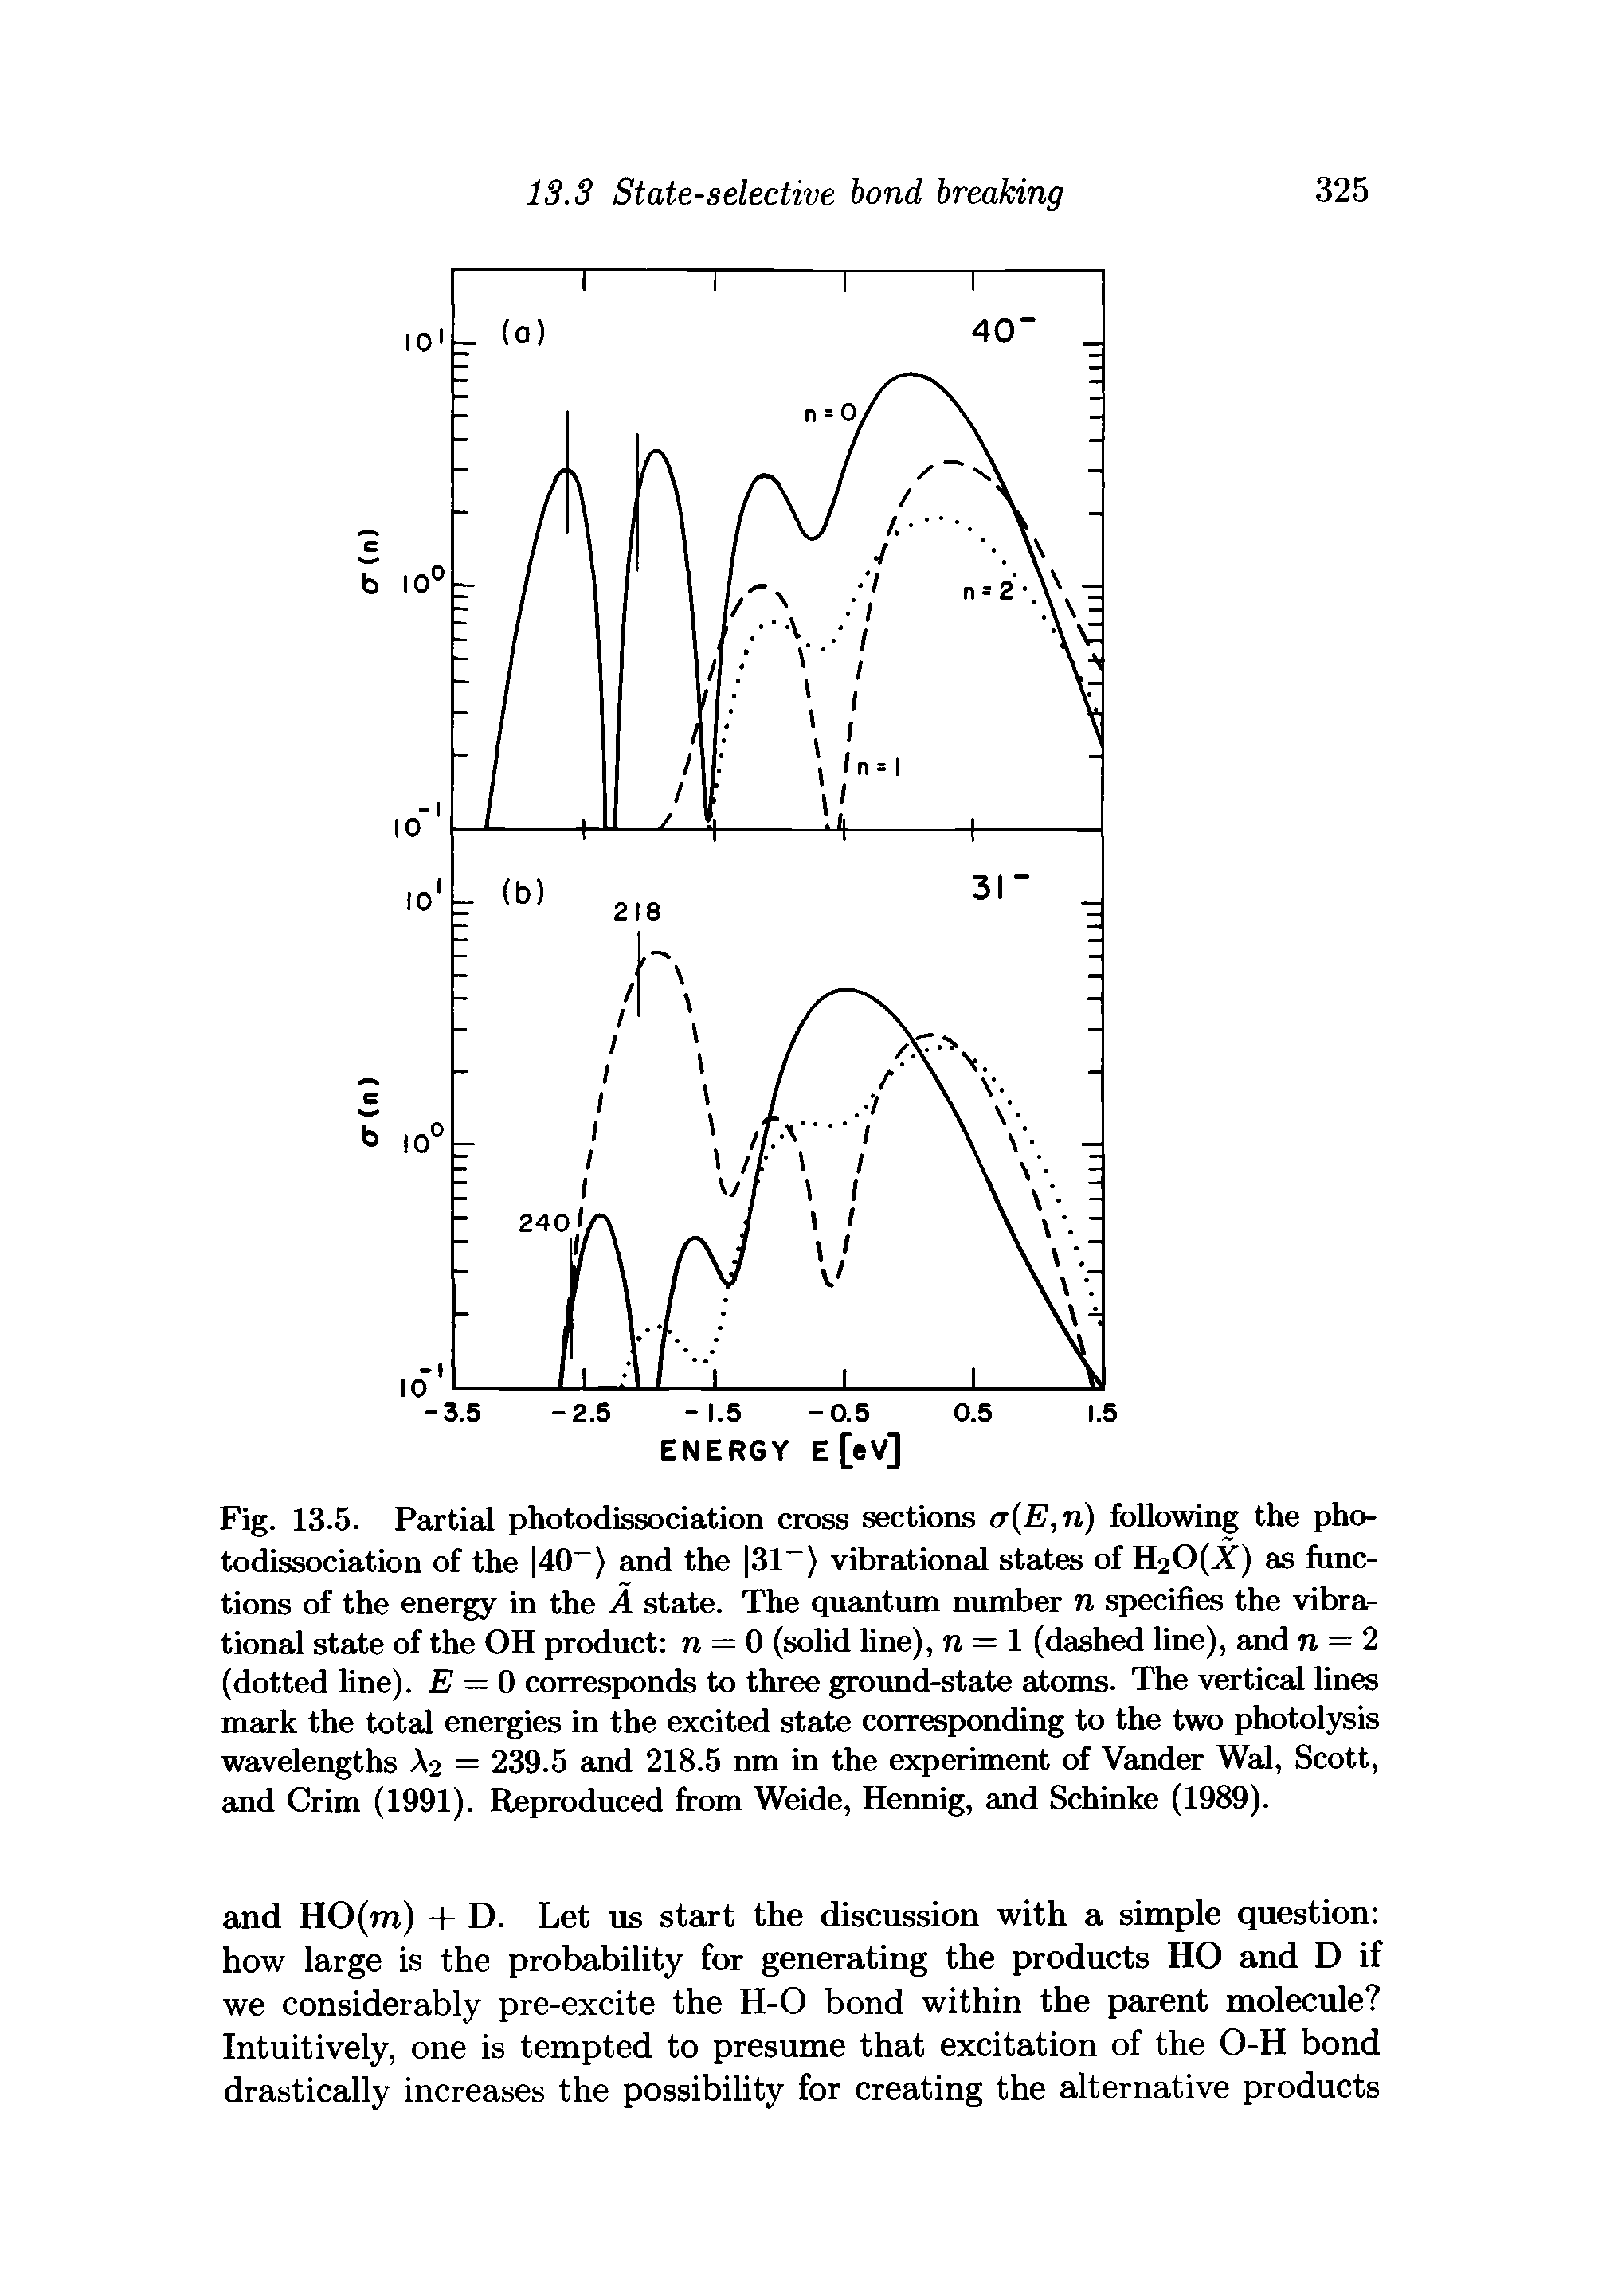 Fig. 13.5. Partial photodissociation cross sections a(E,n) following the photodissociation of the 40 ) and the 31 ) vibrational states of H20(X) as functions of the energy in the A state. The quantum number n specifies the vibrational state of the OH product n = 0 (solid line), n = l (dashed line), and n = 2 (dotted line). E = 0 corresponds to three ground-state atoms. The vertical lines mark the total energies in the excited state corresponding to the two photolysis wavelengths A2 = 239.5 and 218.5 nm in the experiment of Vander Wal, Scott, and Crim (1991). Reproduced from Weide, Hennig, and Schinke (1989).